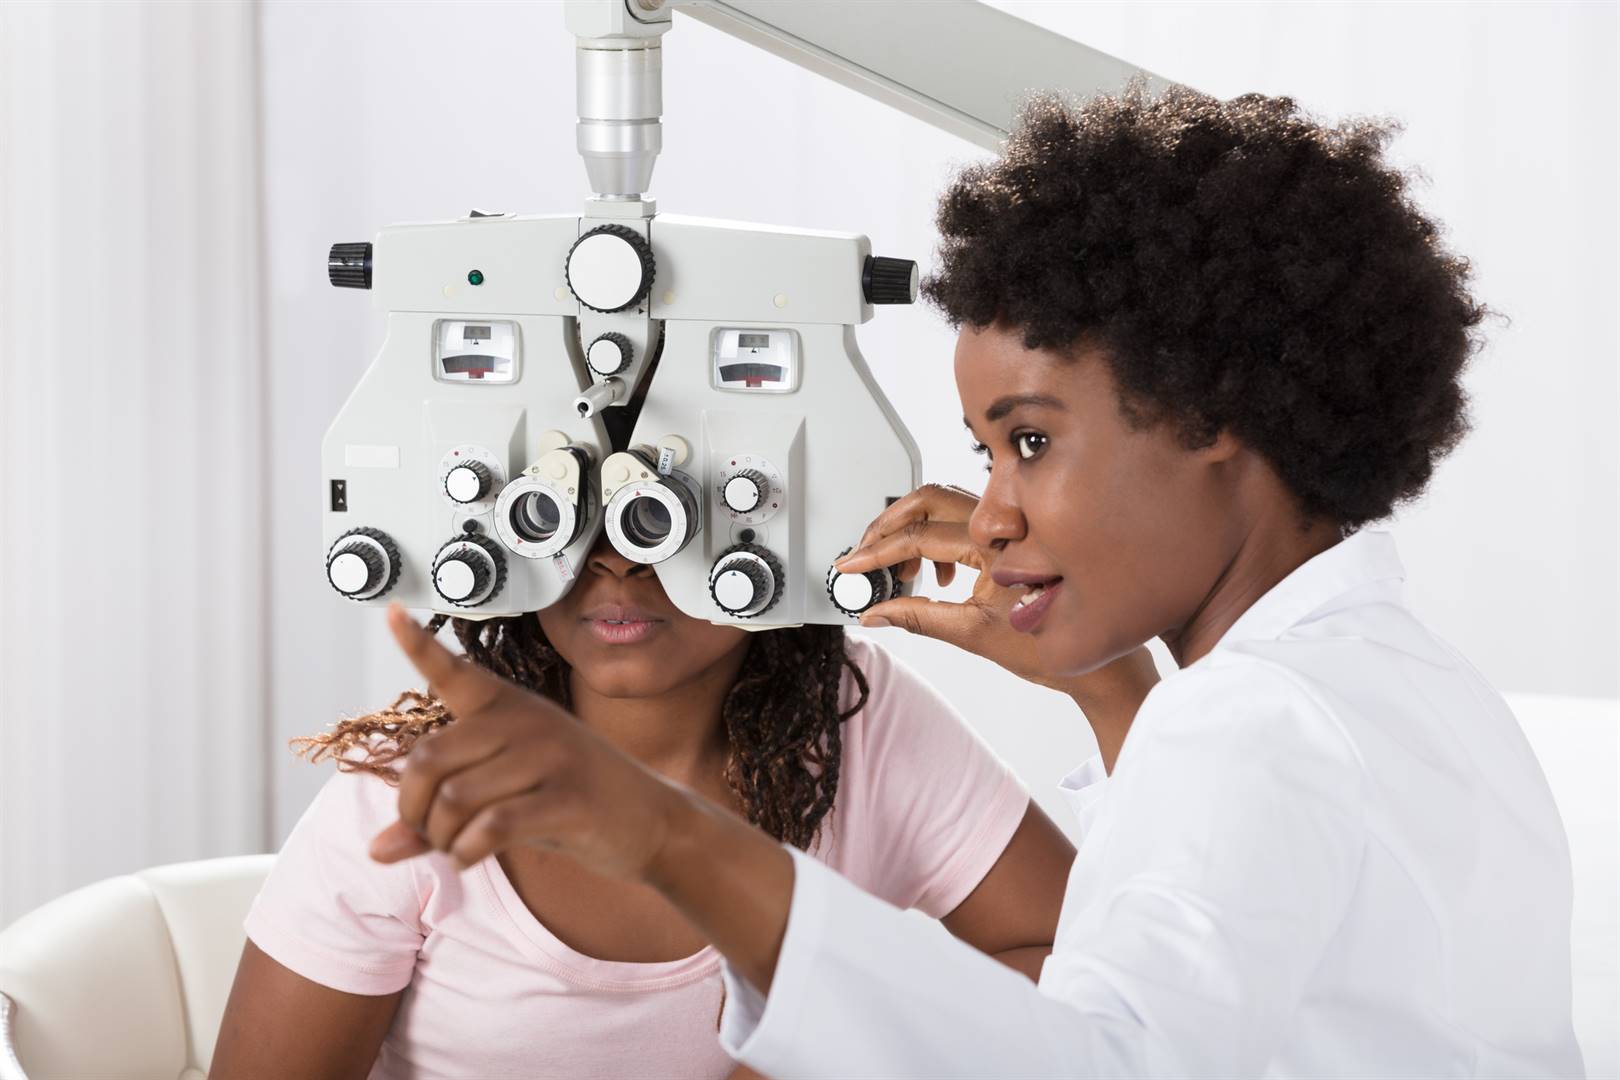 Having your eyes checked regularly helps prevent serious vision impairment.